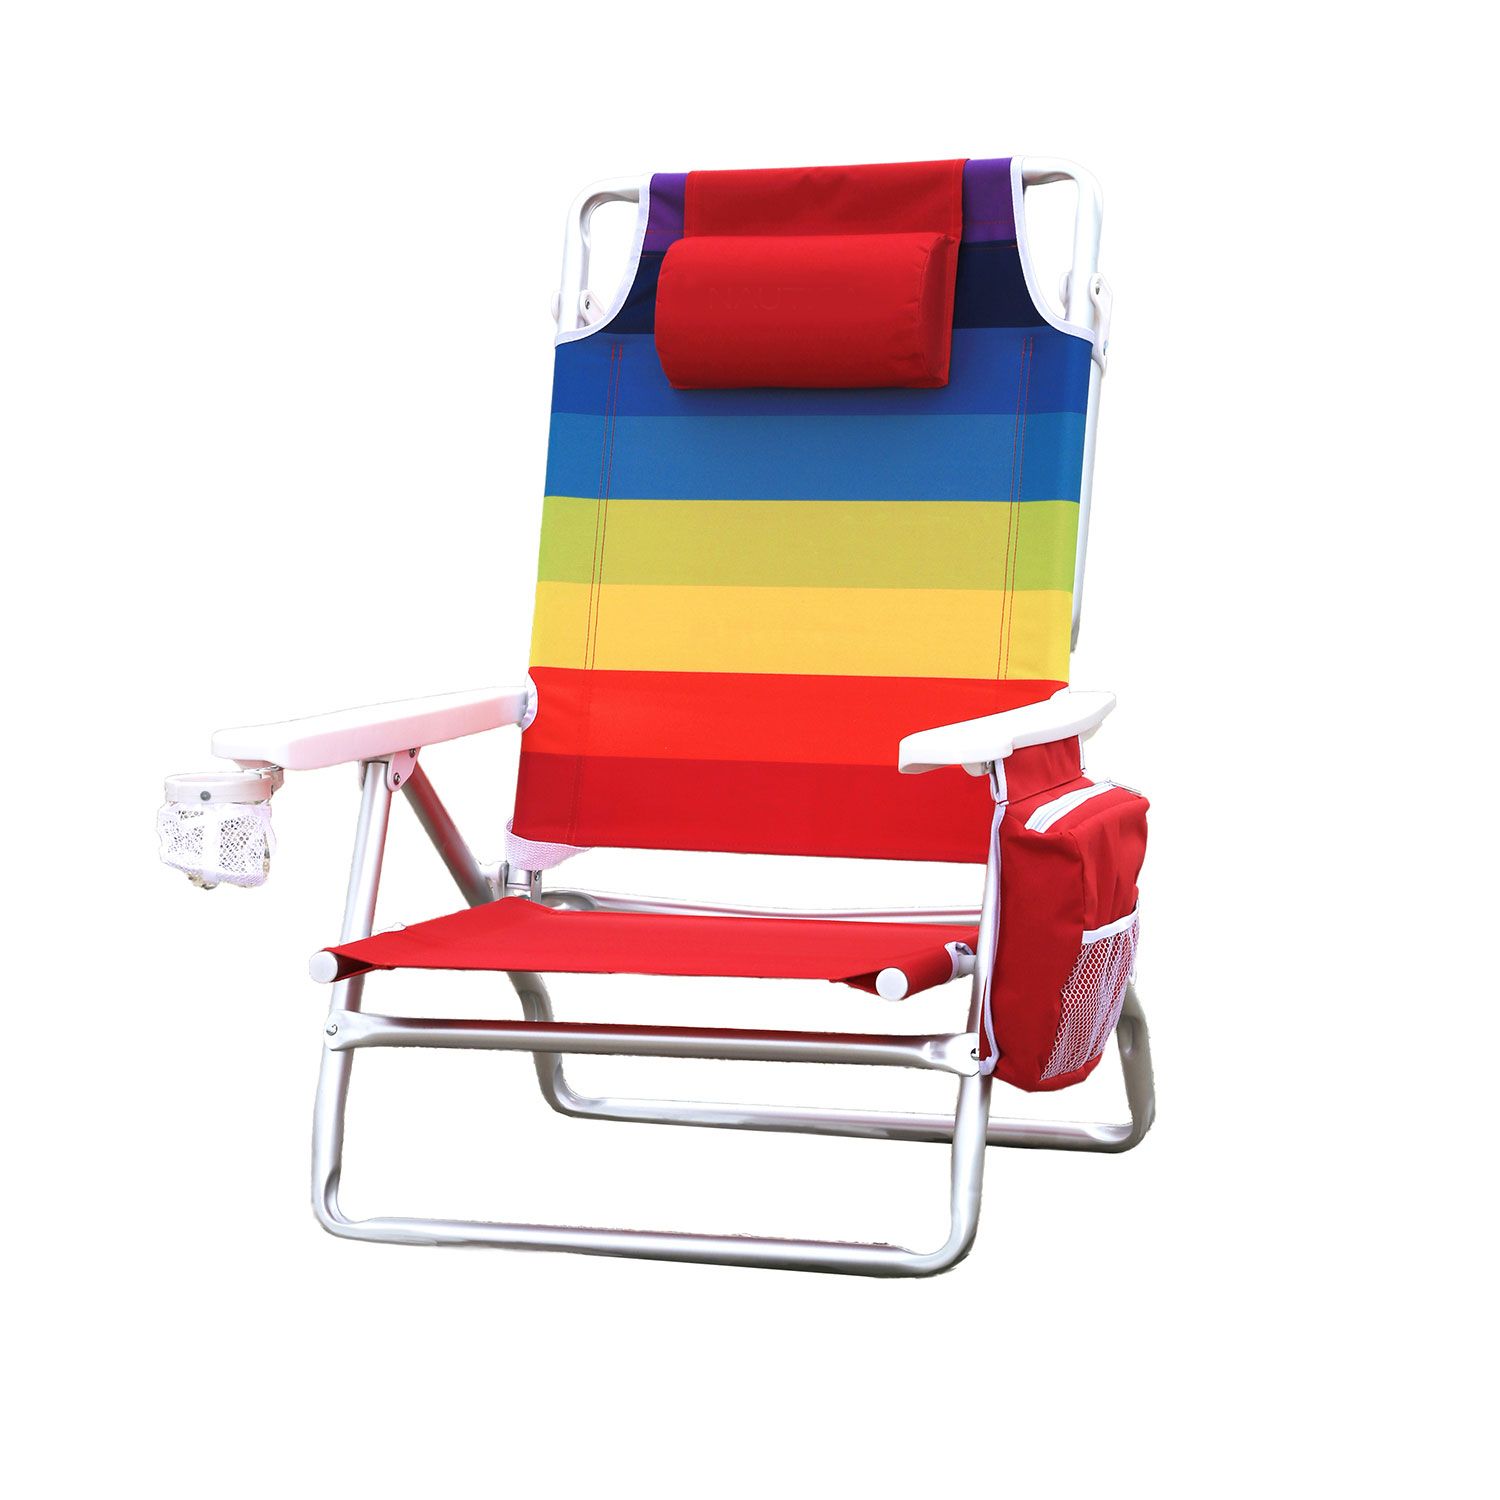 Nautica Rainbow Beach Chair 5 position recline up to 300 pounds